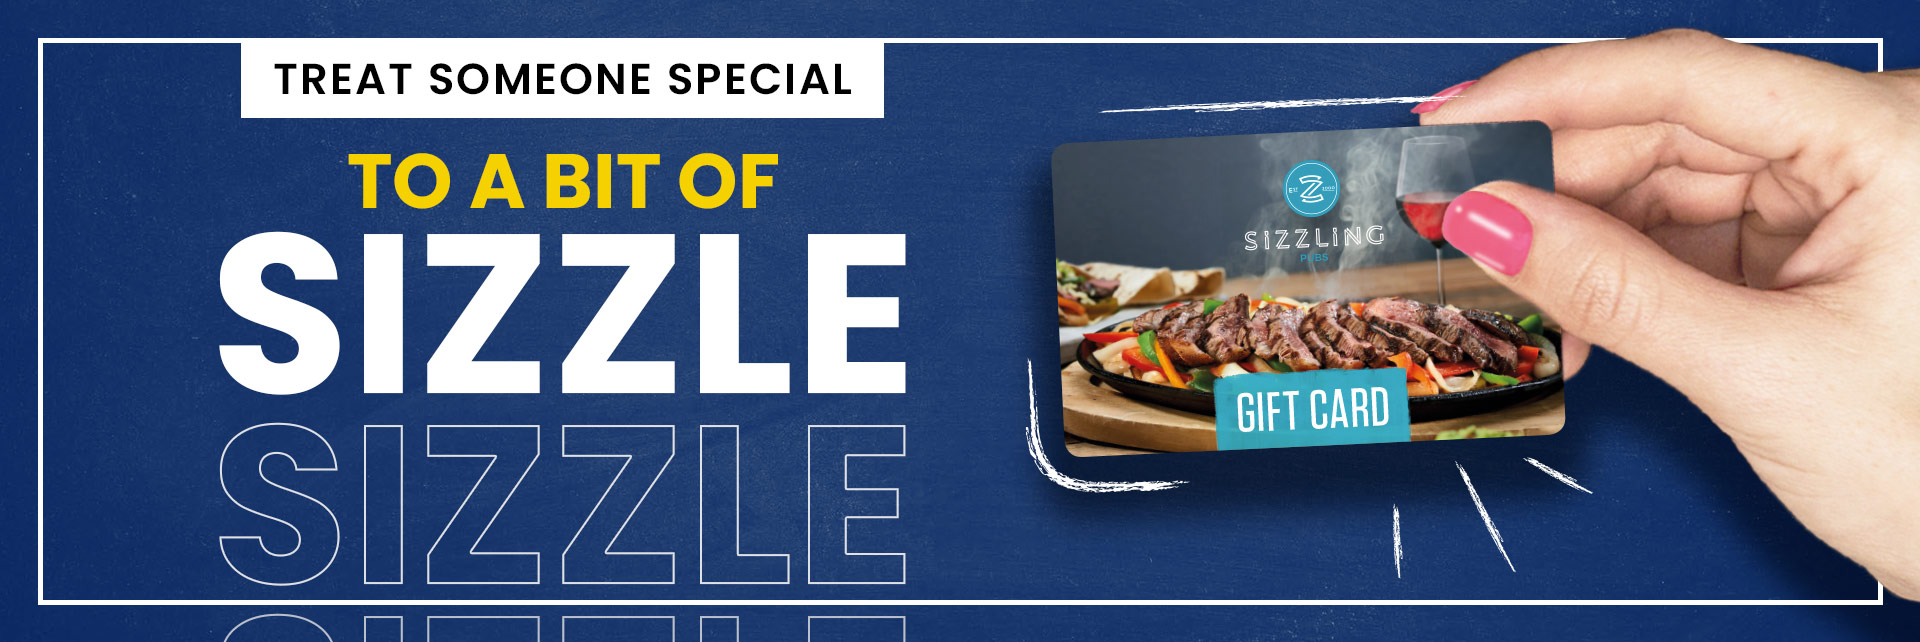 Sizzling Pubs Gift Card at The Towers Inn in Birmingham